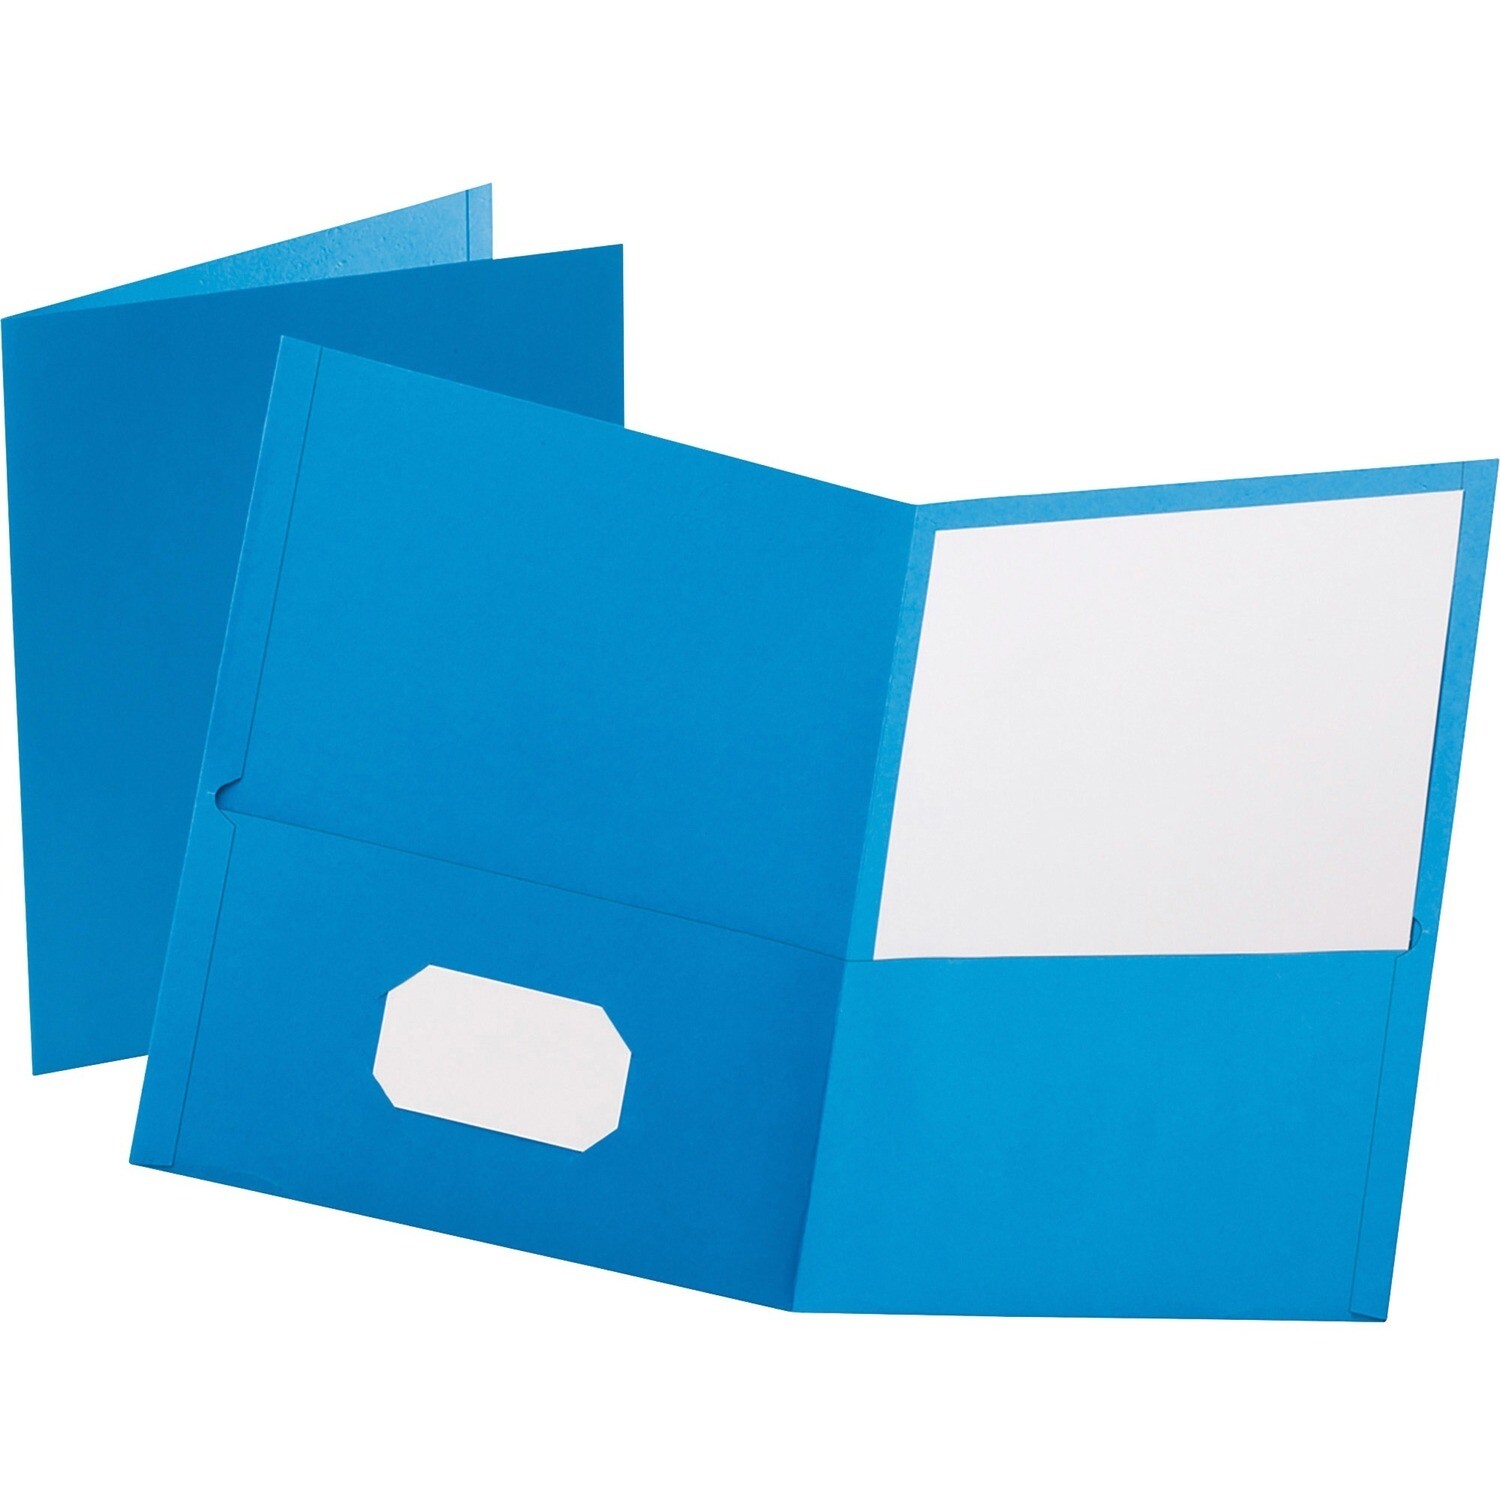 Twin Pocket Folder, with Business Card Slot Light Blue, Box of 25, Oxford